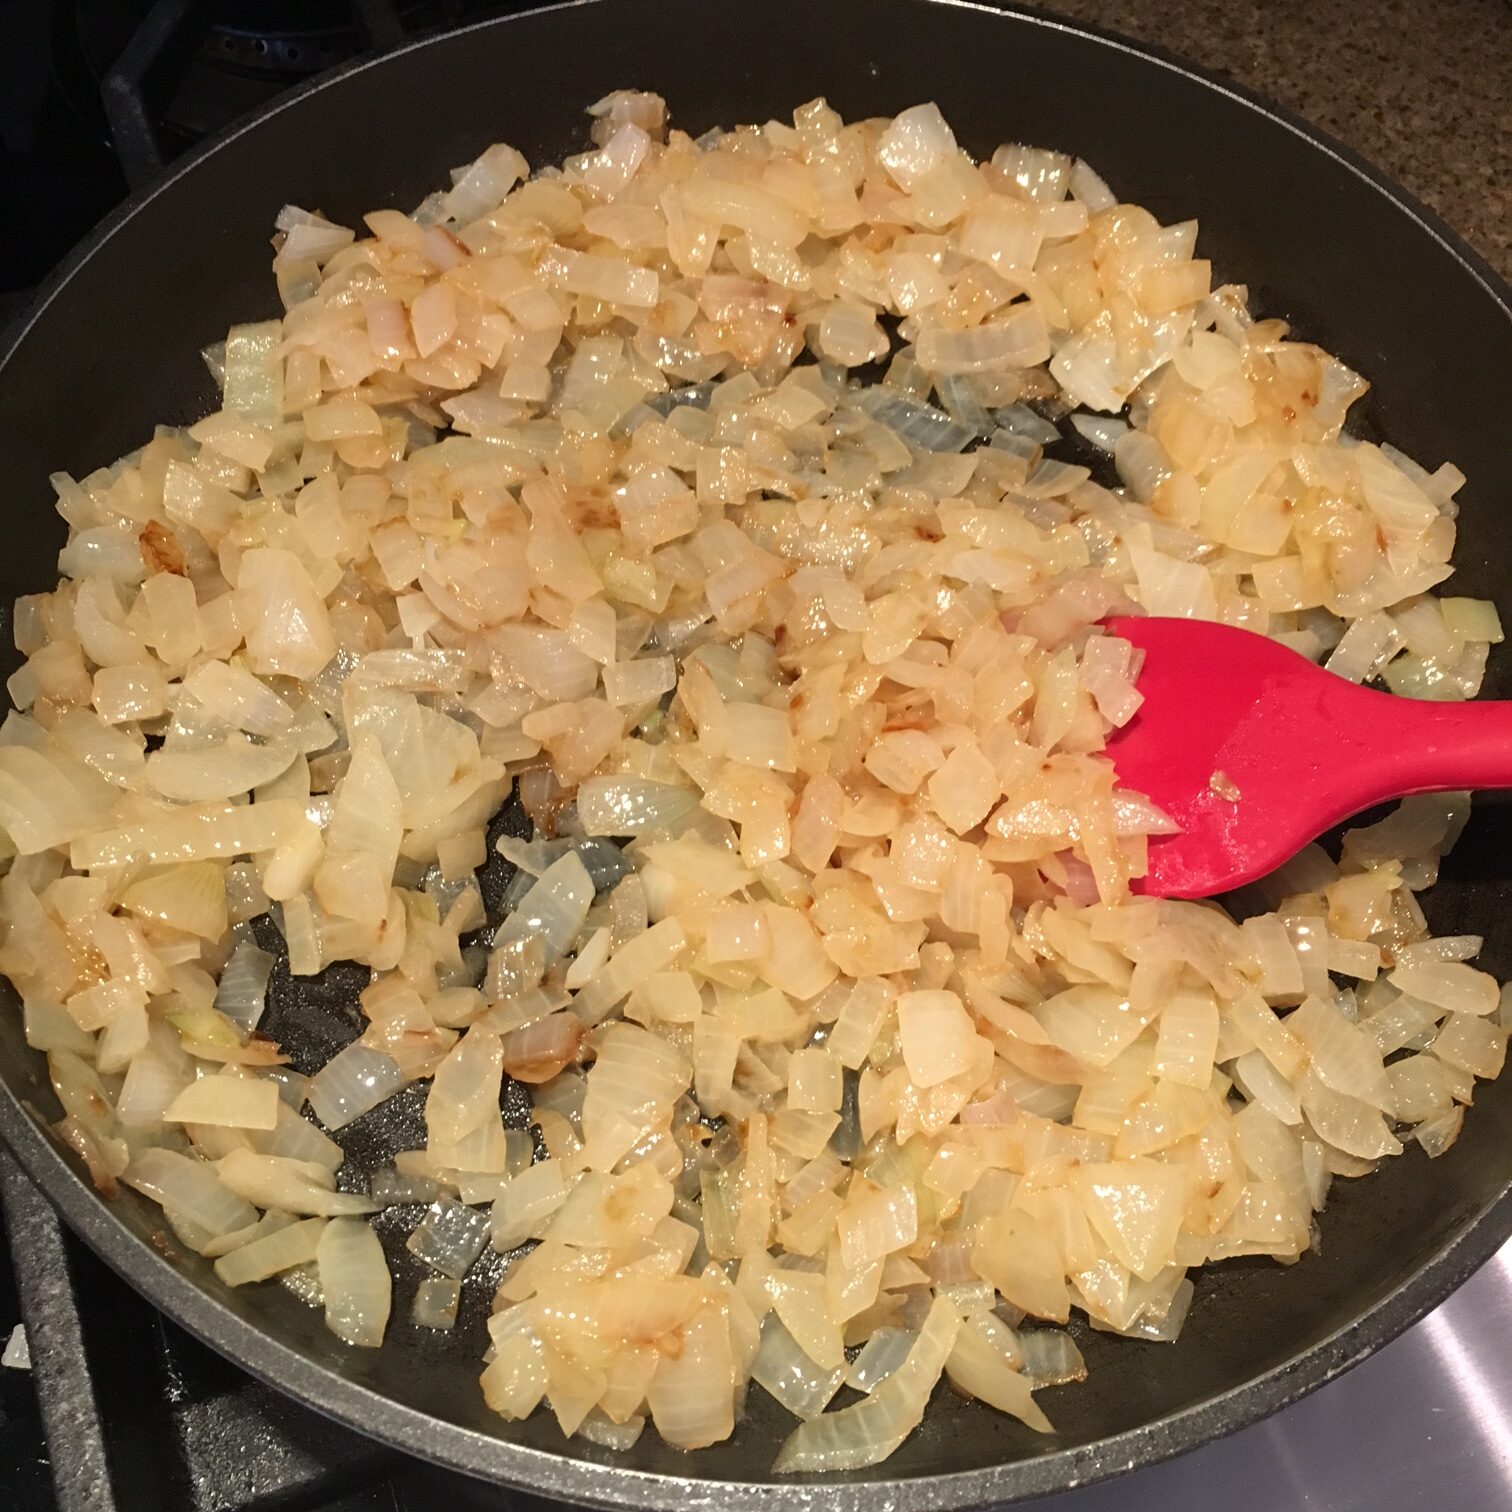 Onions being sautéd on the stove in a pan.